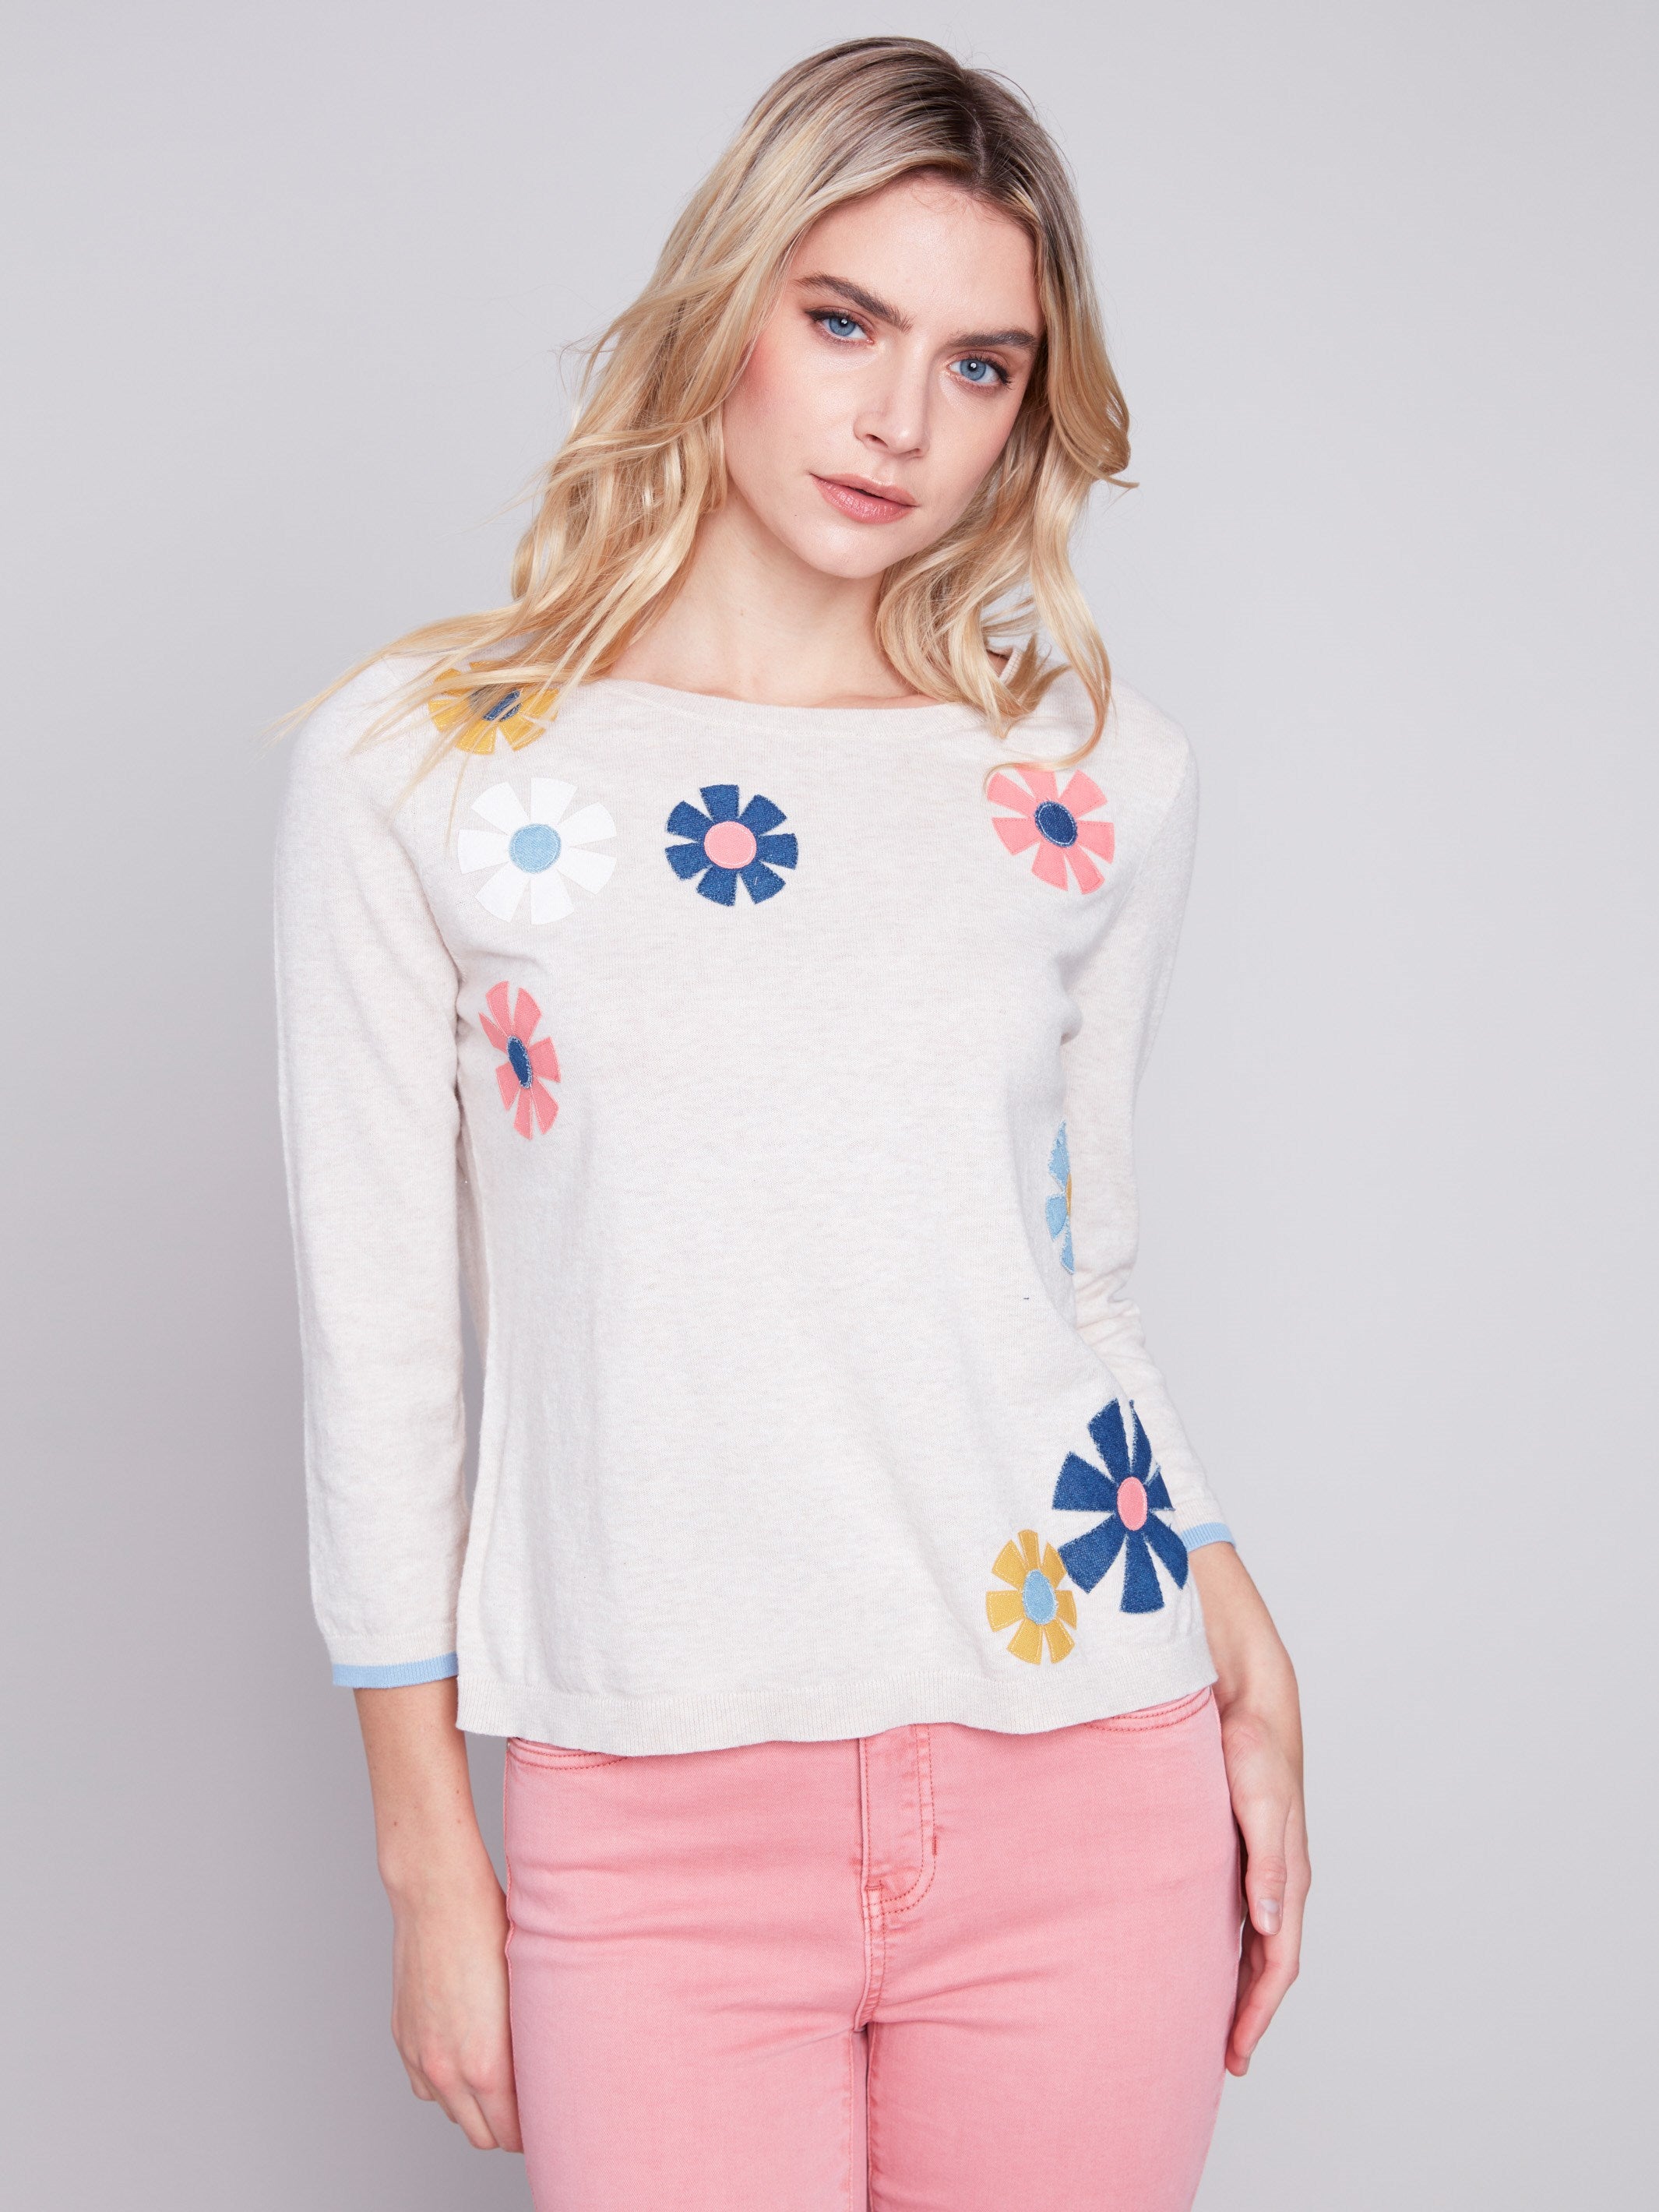 Sweater with Flower Patches - Beige - Charlie B Collection Canada - Image 1